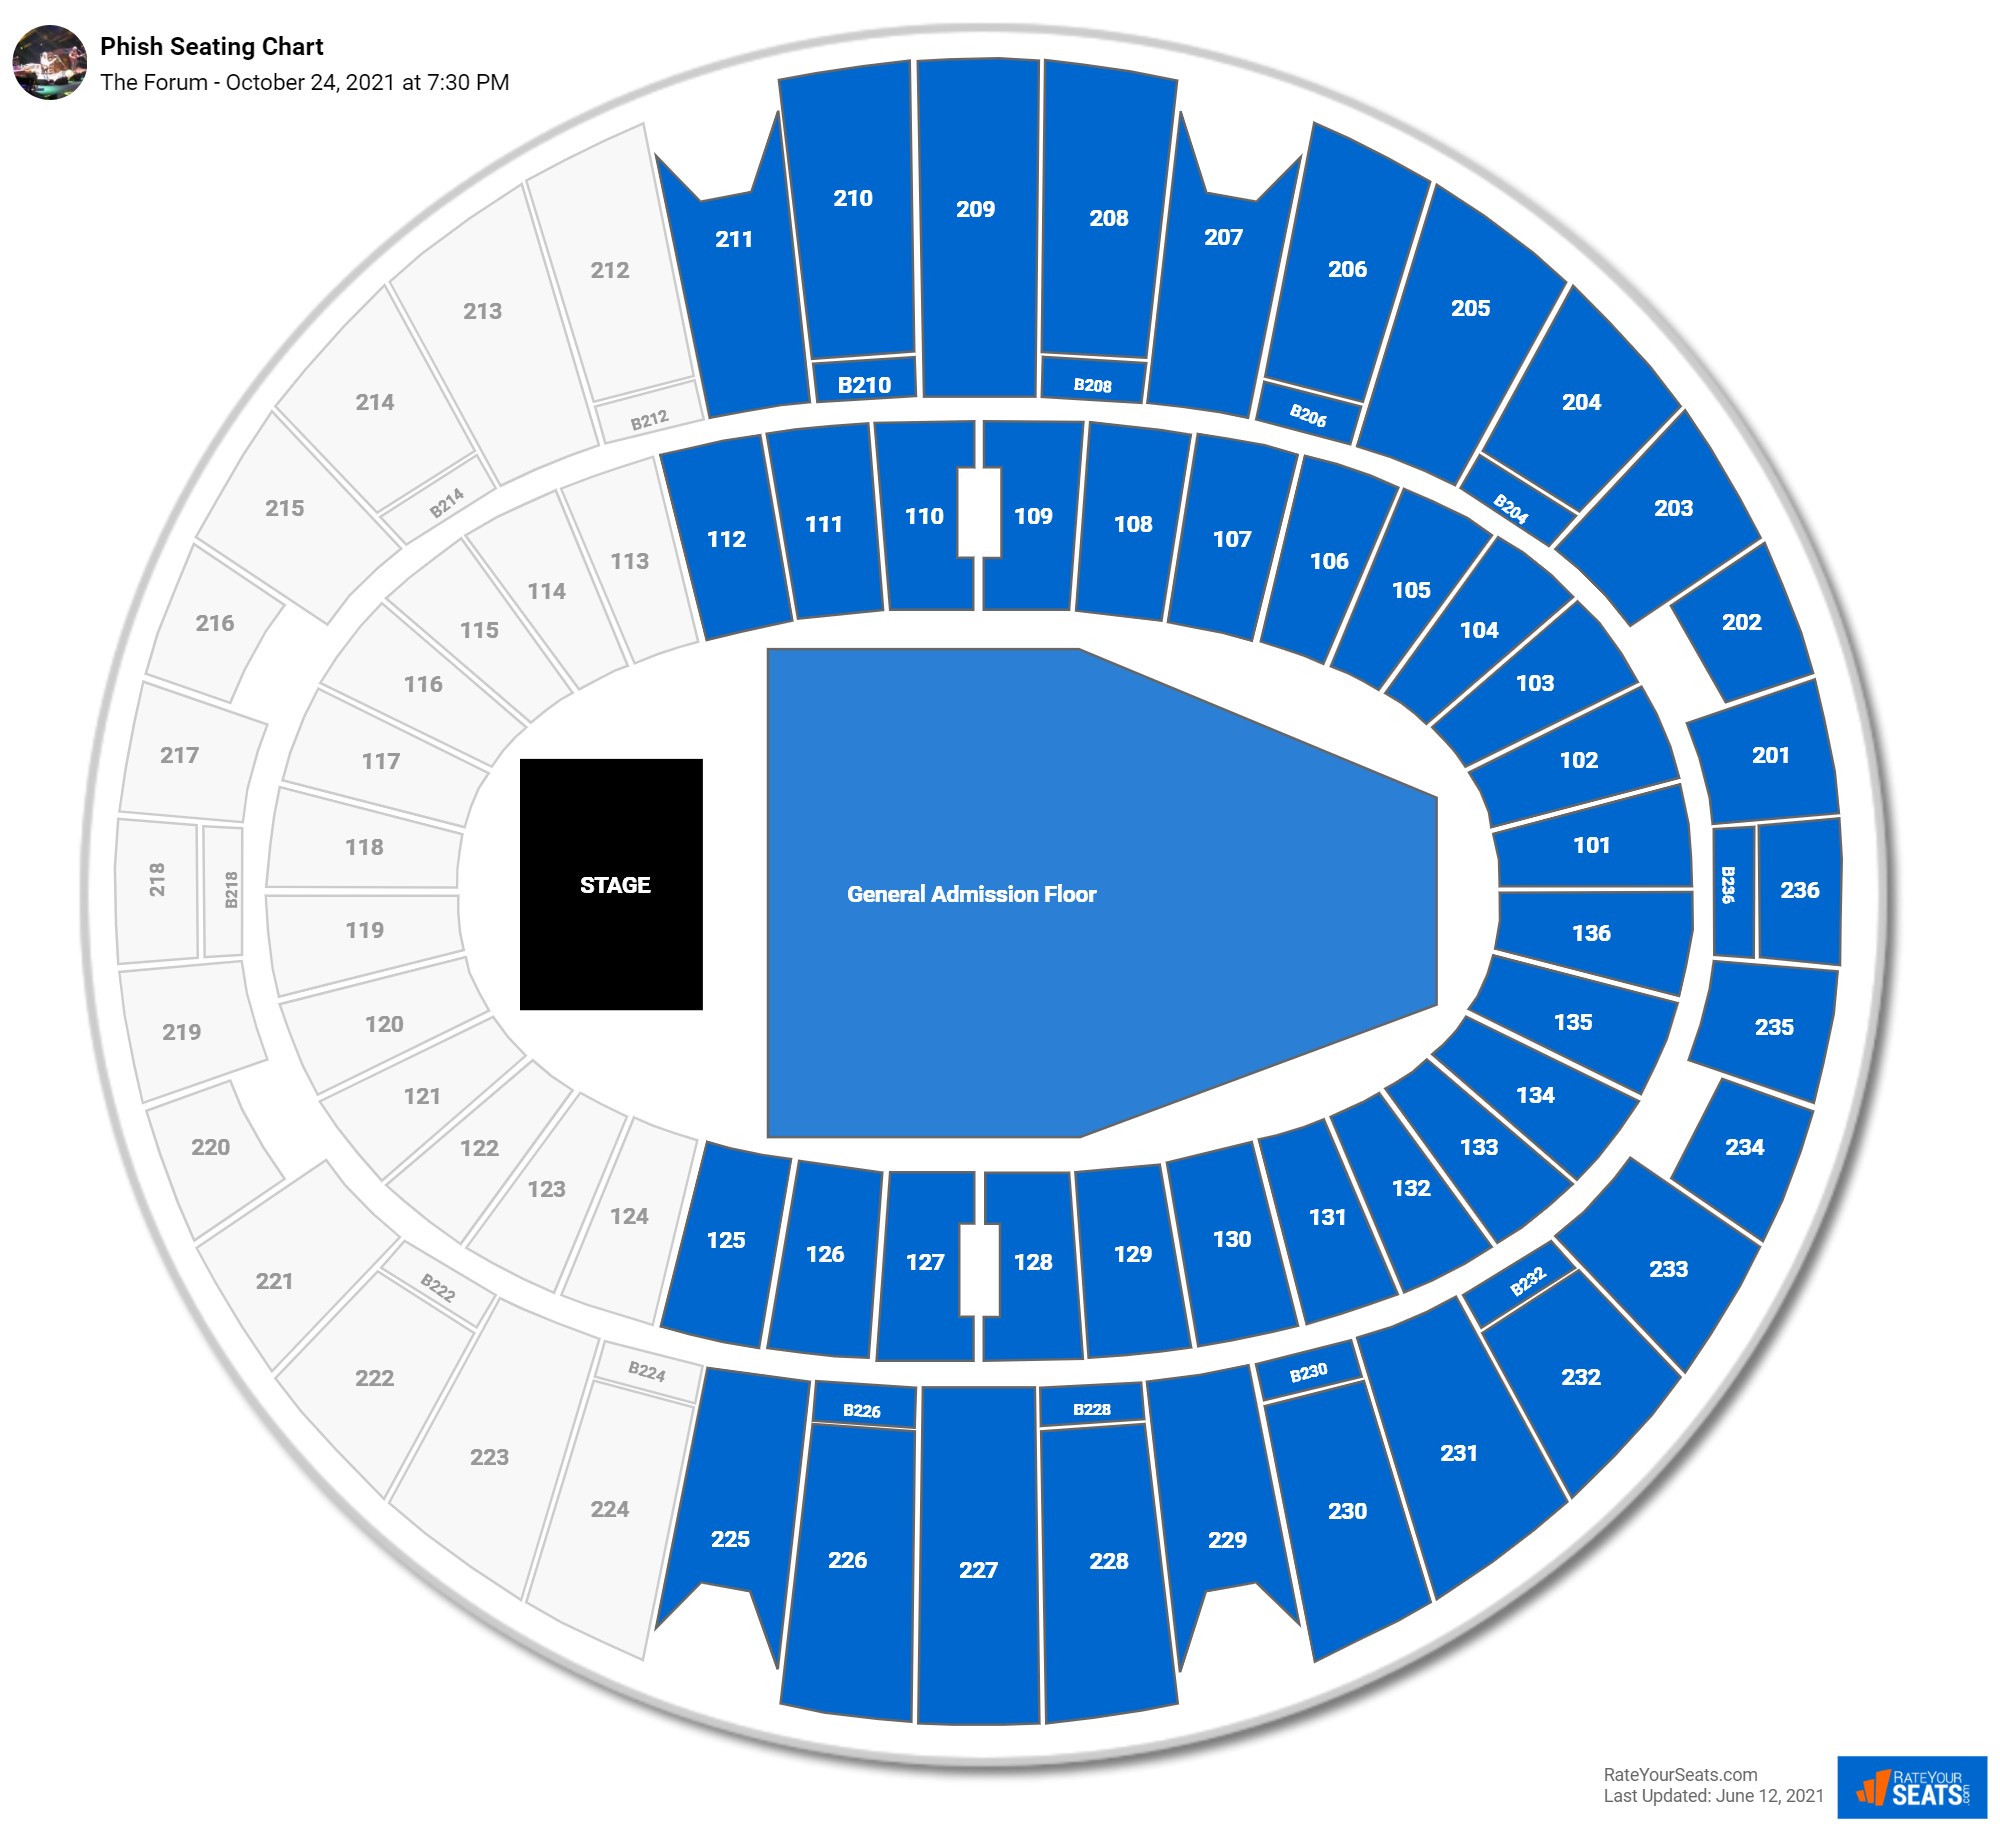 The Forum Seating Chart